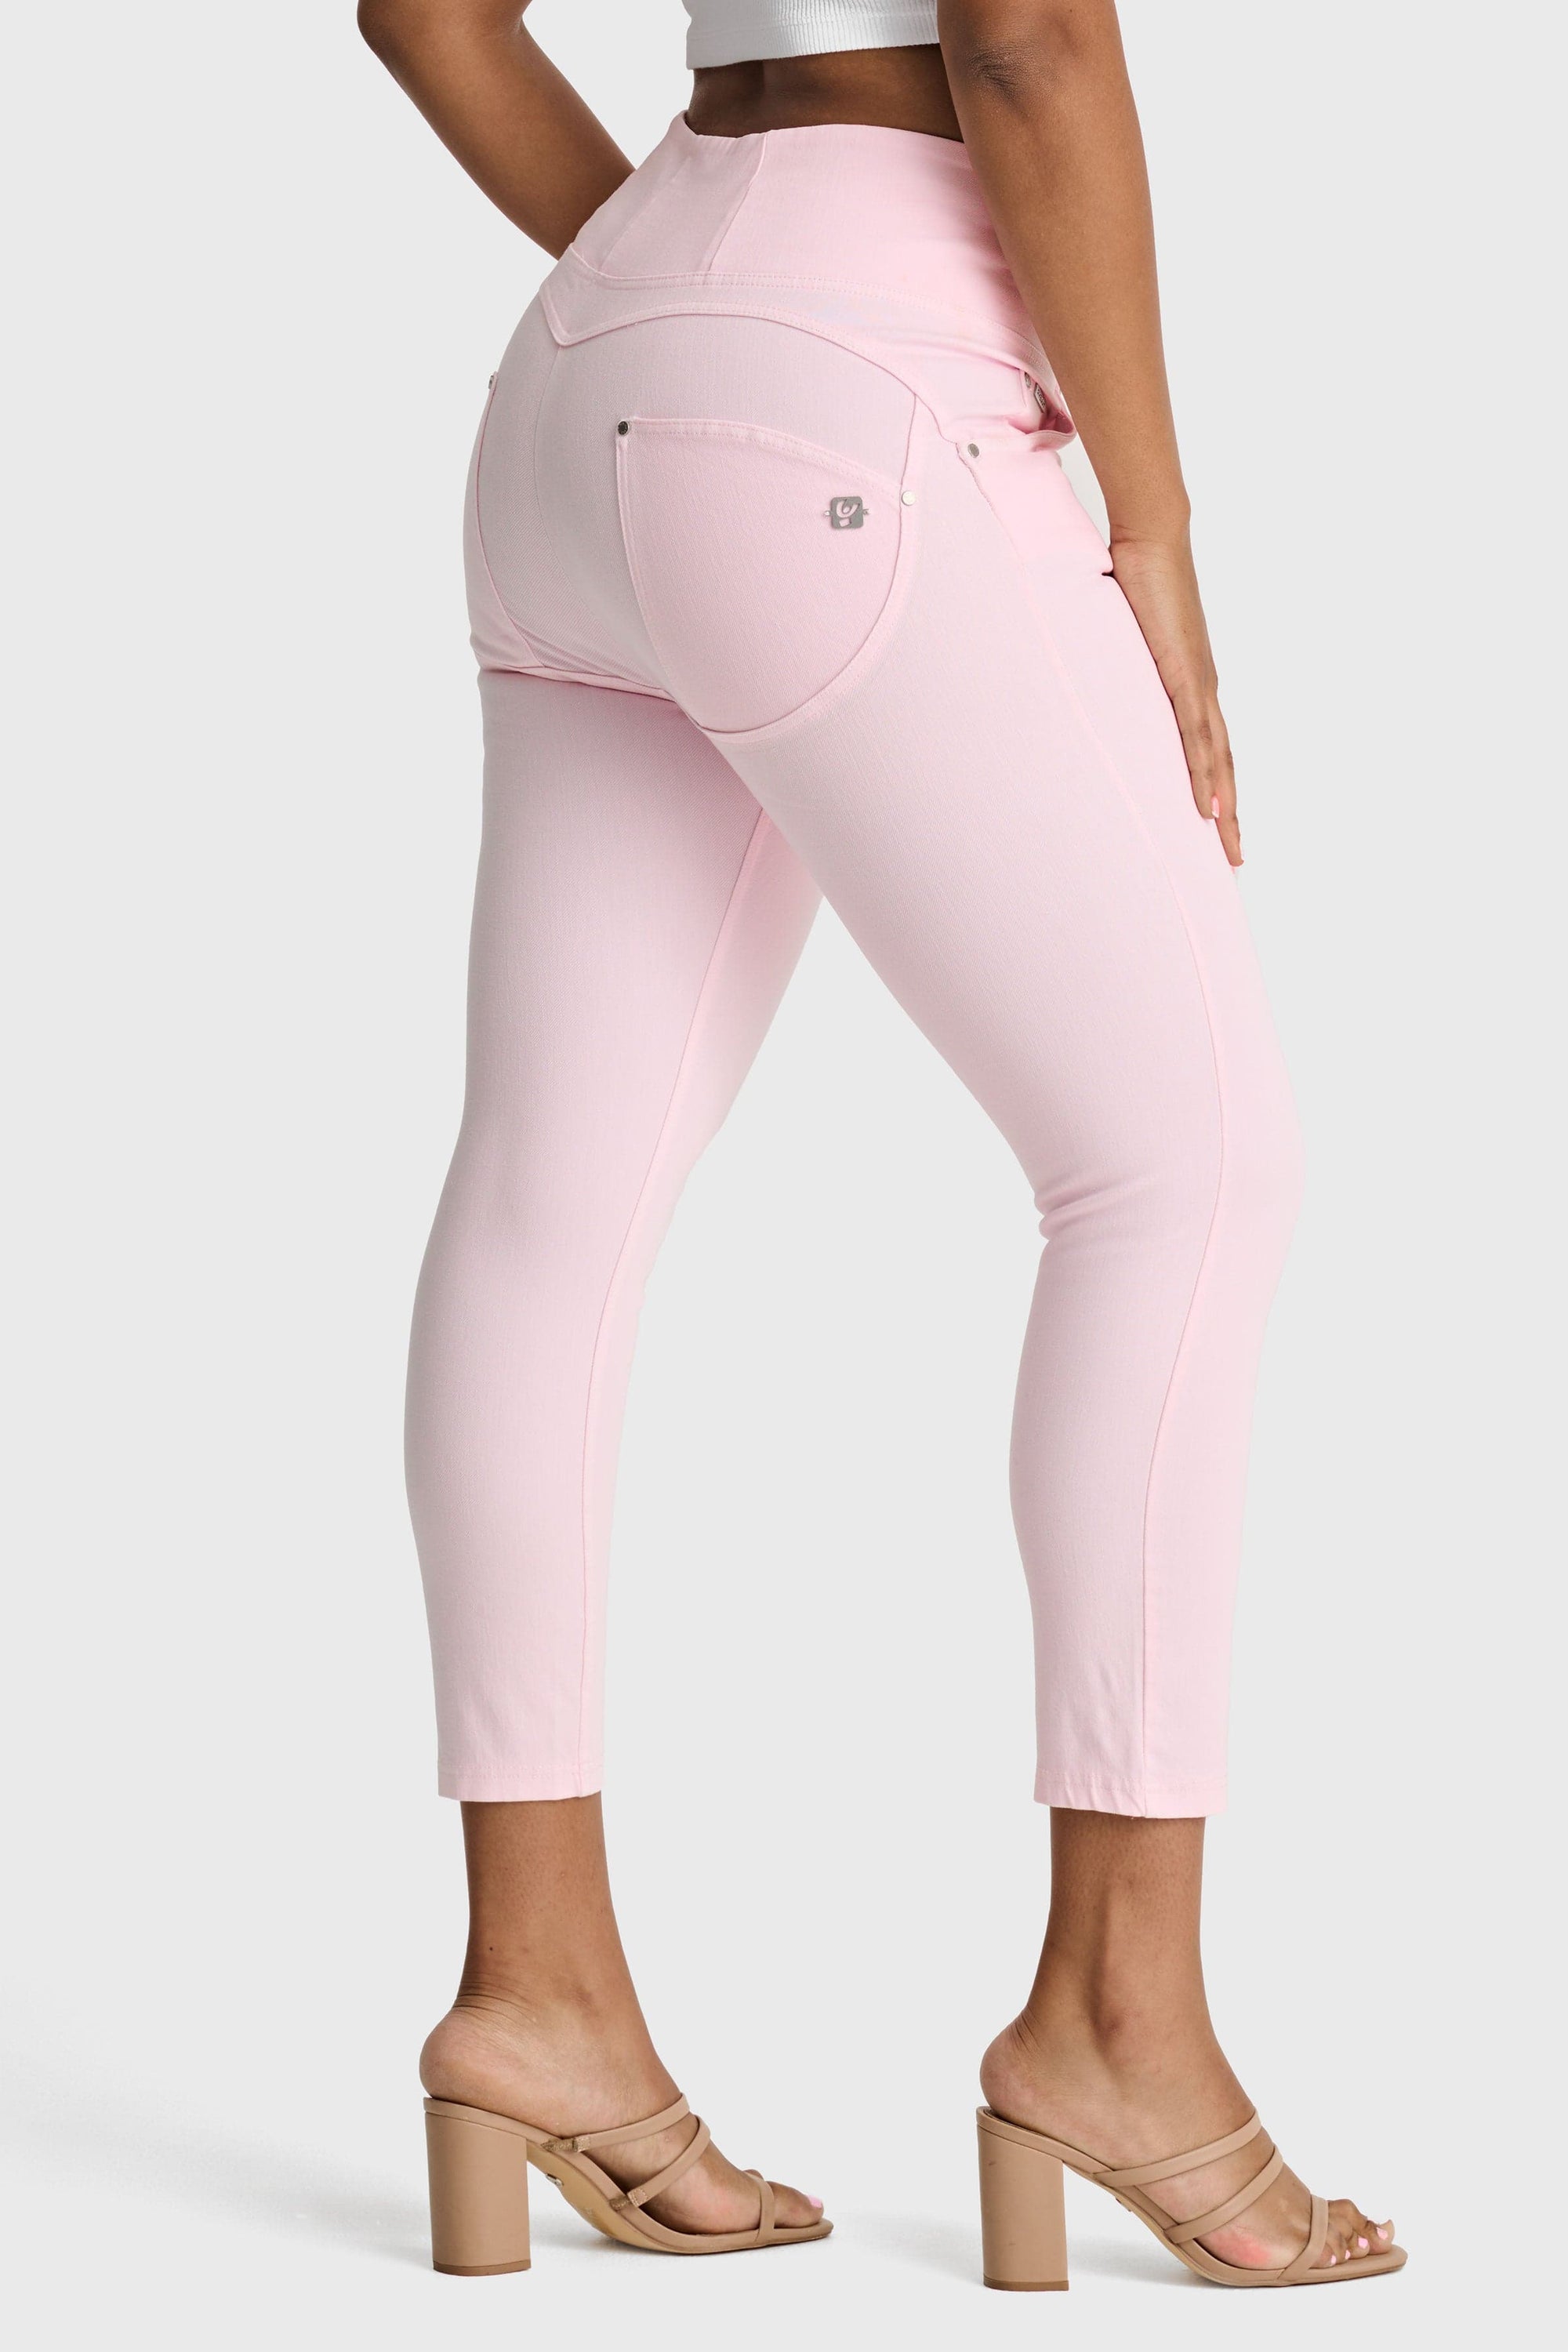 WR.UP® Snug Curvy Jeans - High Waisted - Petite Length - Baby Pink 1